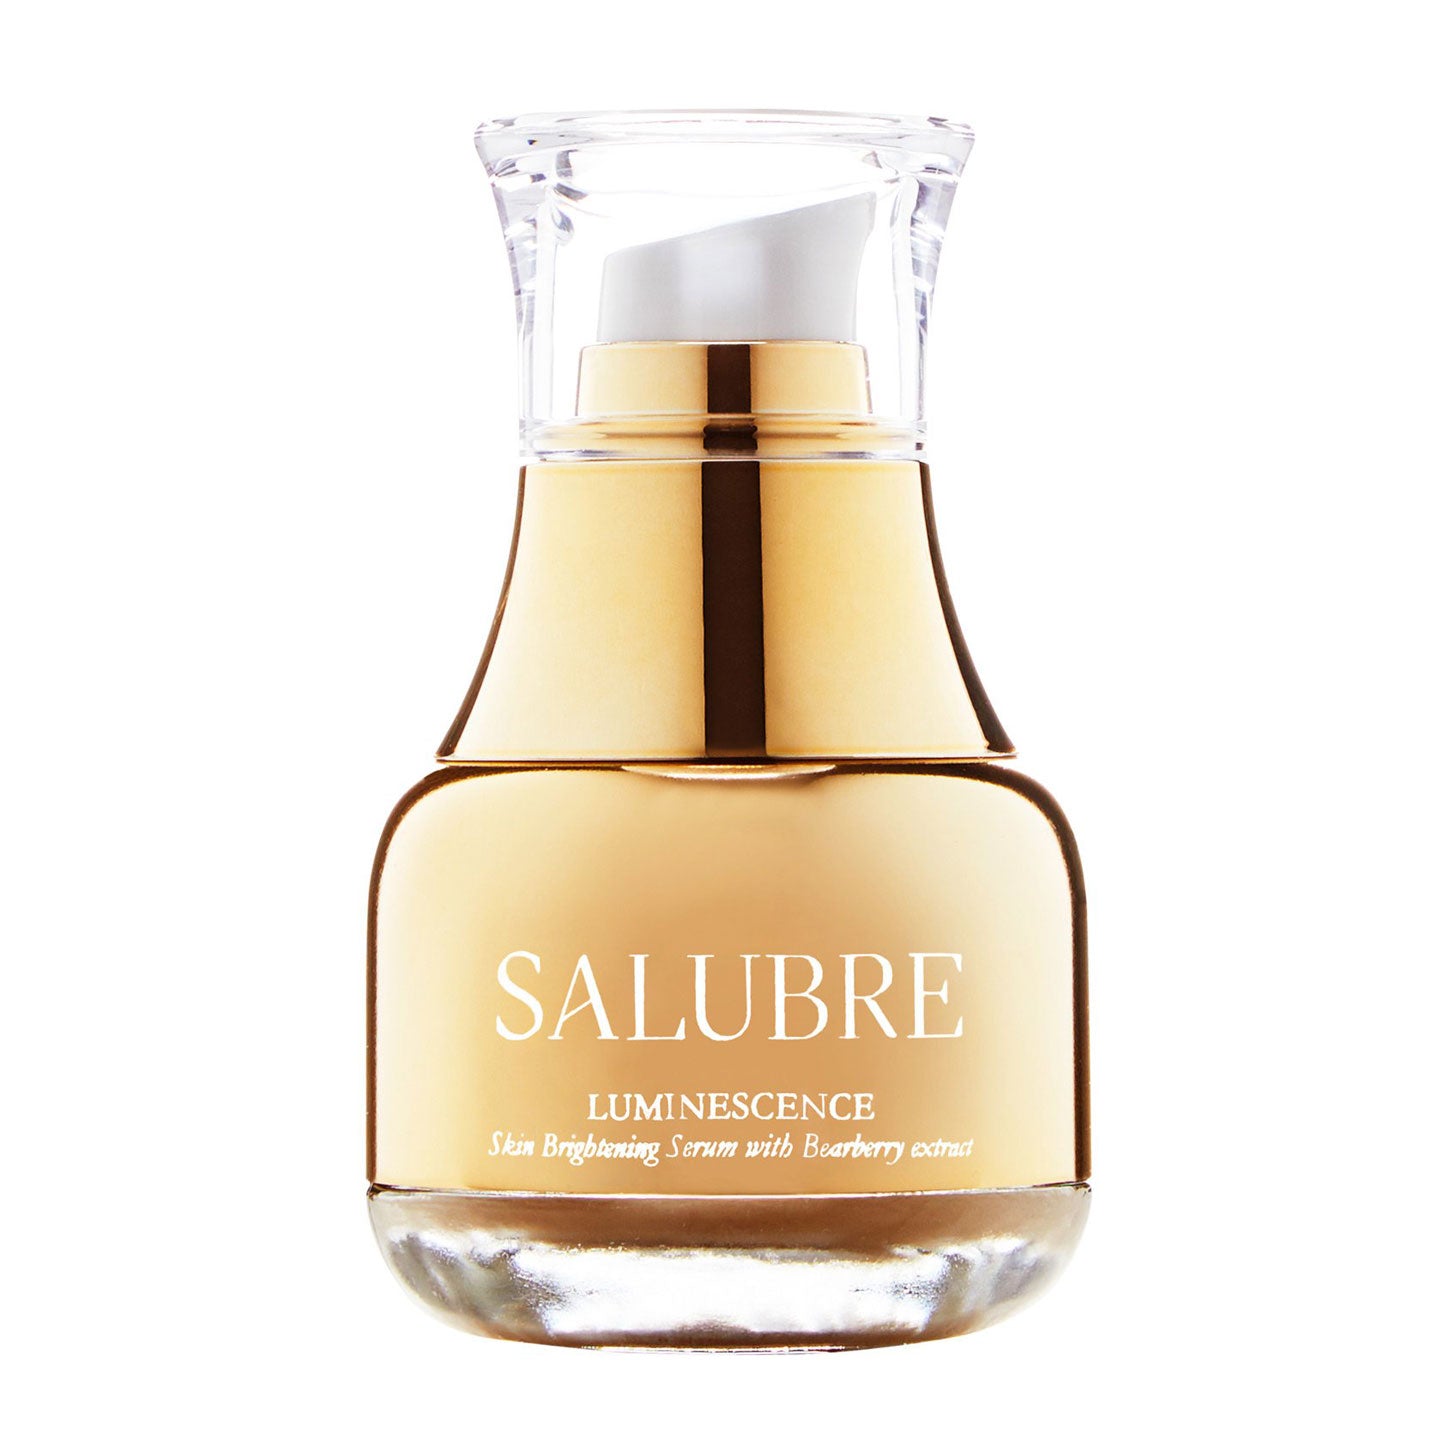 Luminescence Skin Brightening Serum to improve the appearance of dark spots and hyper-pigmentation.